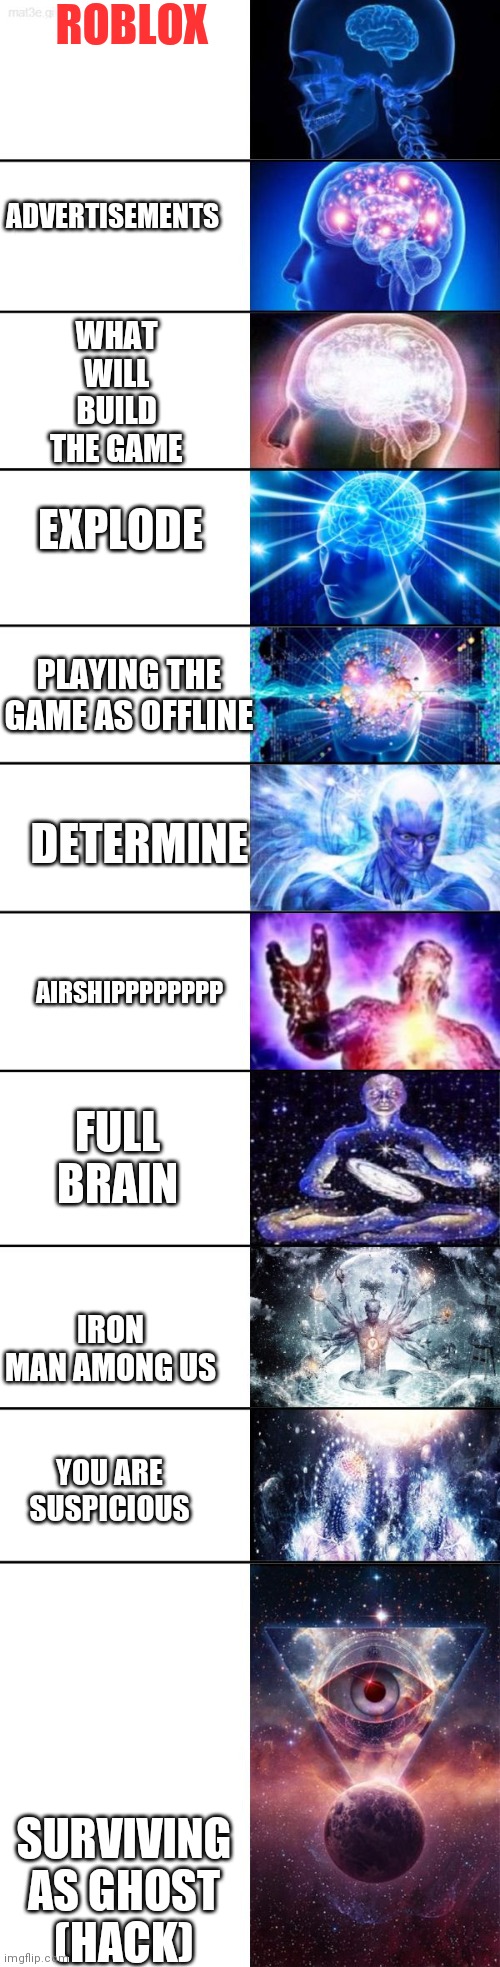 Extended Expanding Brain | ROBLOX; ADVERTISEMENTS; WHAT WILL BUILD THE GAME; EXPLODE; PLAYING THE GAME AS OFFLINE; AIRSHIPPPPPPPP; DETERMINE; FULL BRAIN; IRON MAN AMONG US; YOU ARE SUSPICIOUS; SURVIVING AS GHOST (HACK) | image tagged in extended expanding brain | made w/ Imgflip meme maker